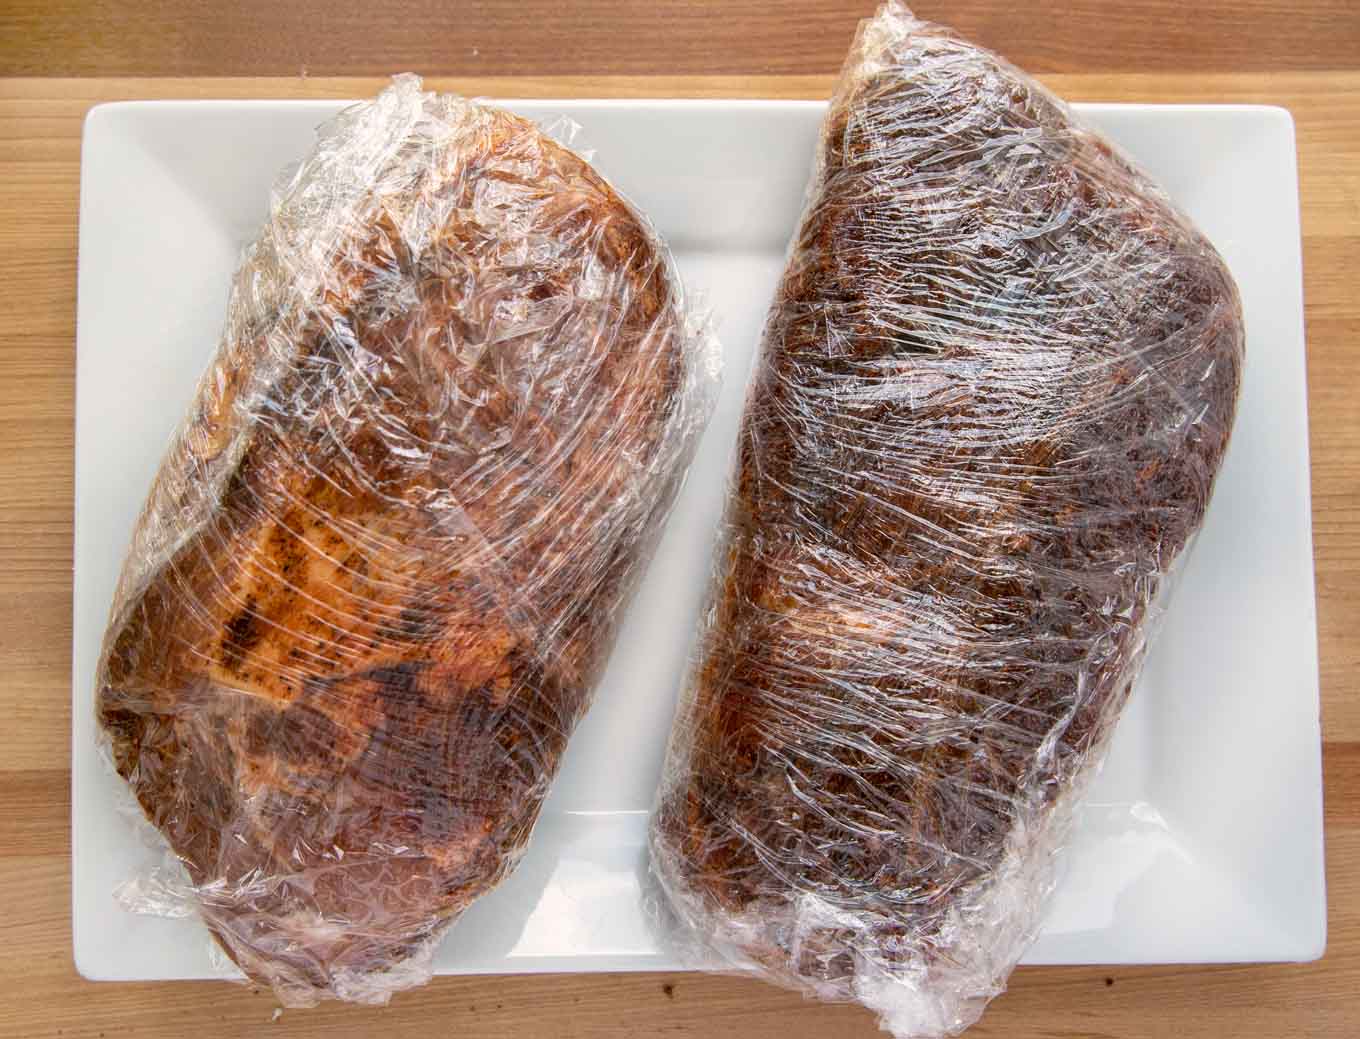 2 pork roasts coated with a dry rub and double wrapped in plastic wrap sitting on a white platter